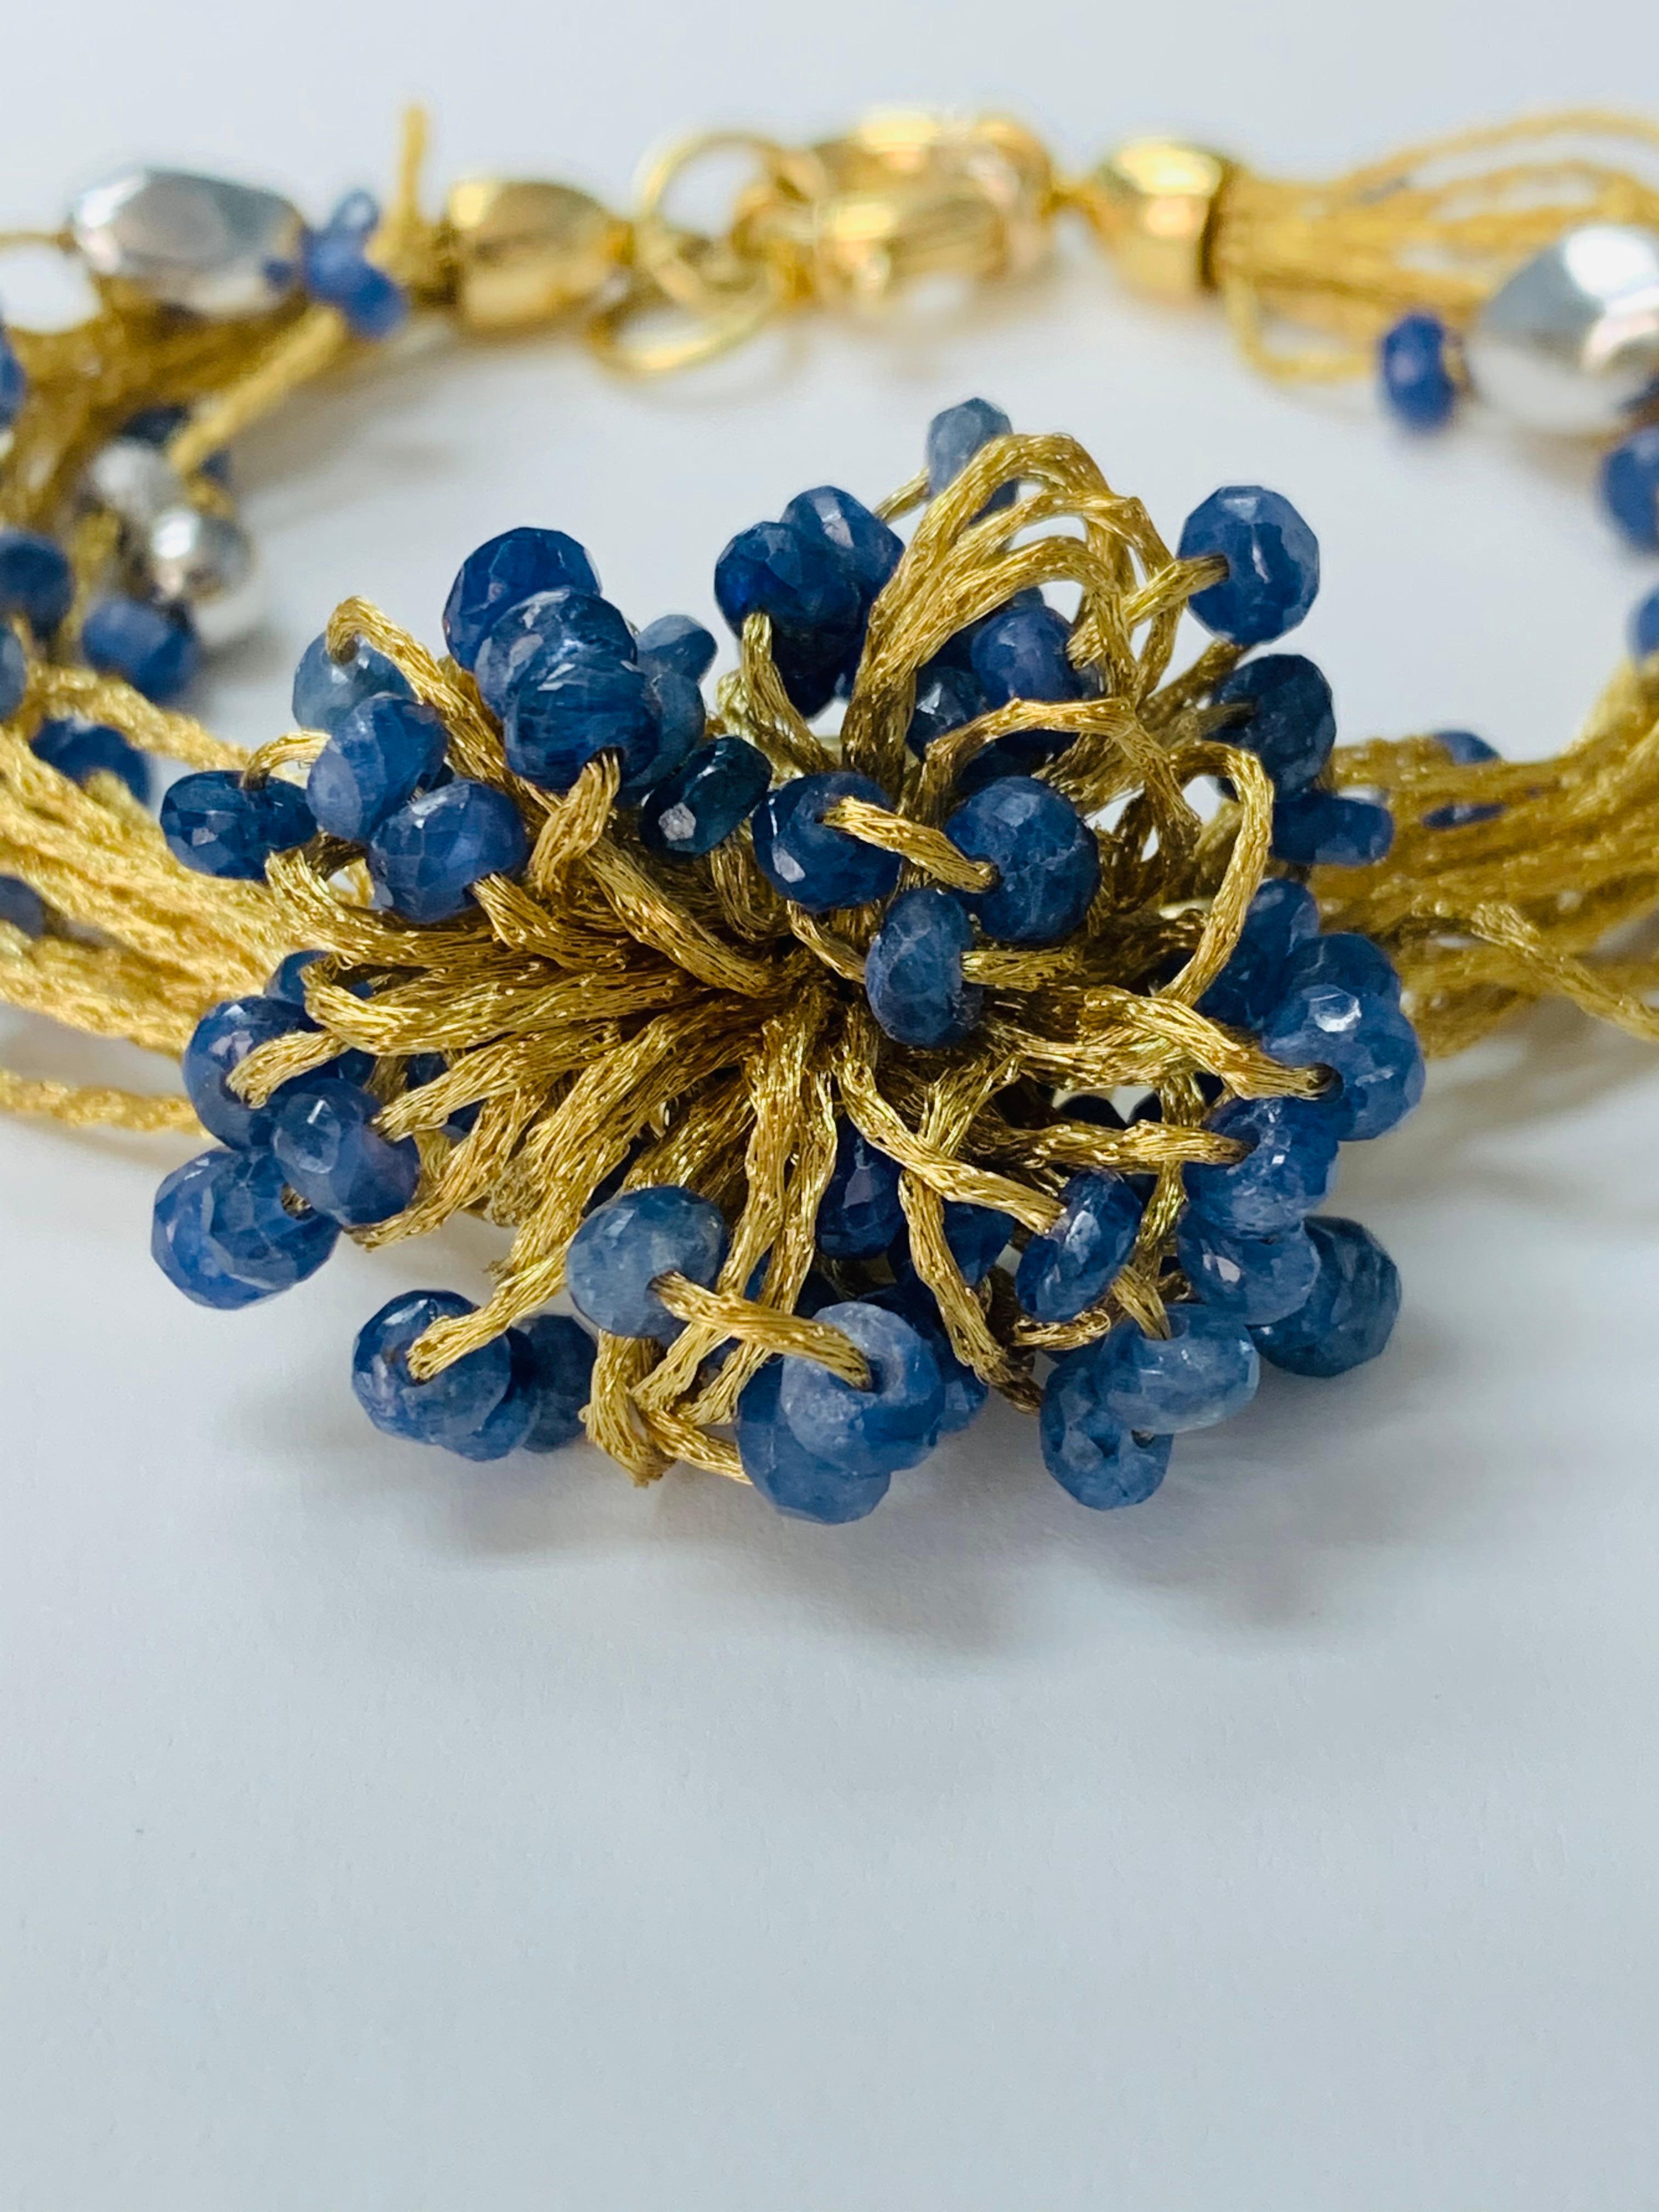 Contemporary Blue Sapphire Beads, White Gold and Yellow Gold Bracelet